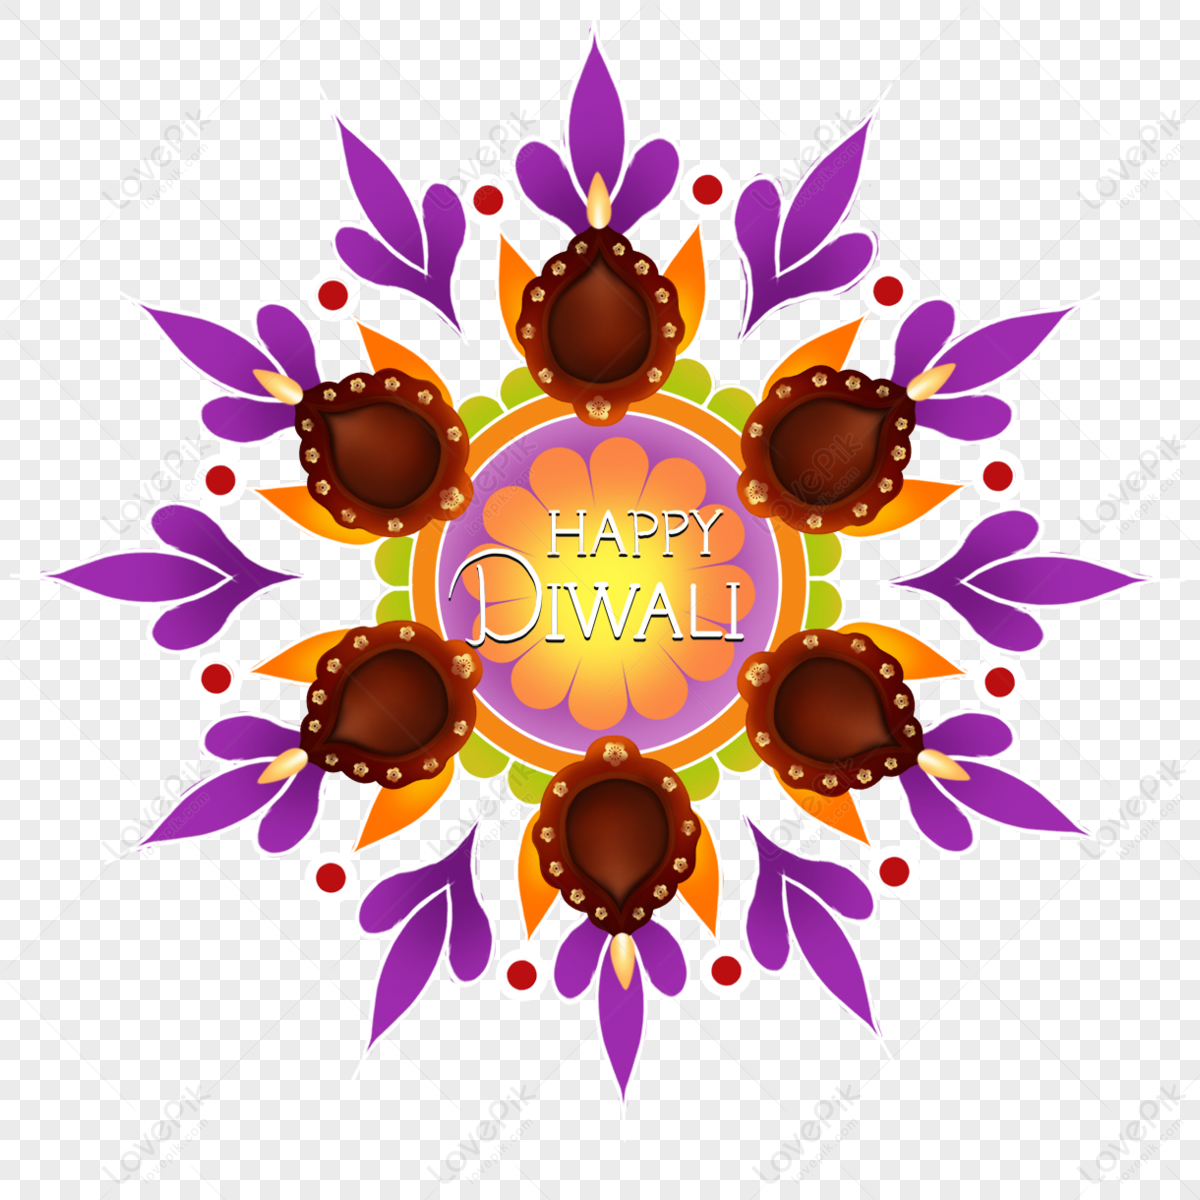 Diwali Flower PNG Images With Transparent Background | Free ...